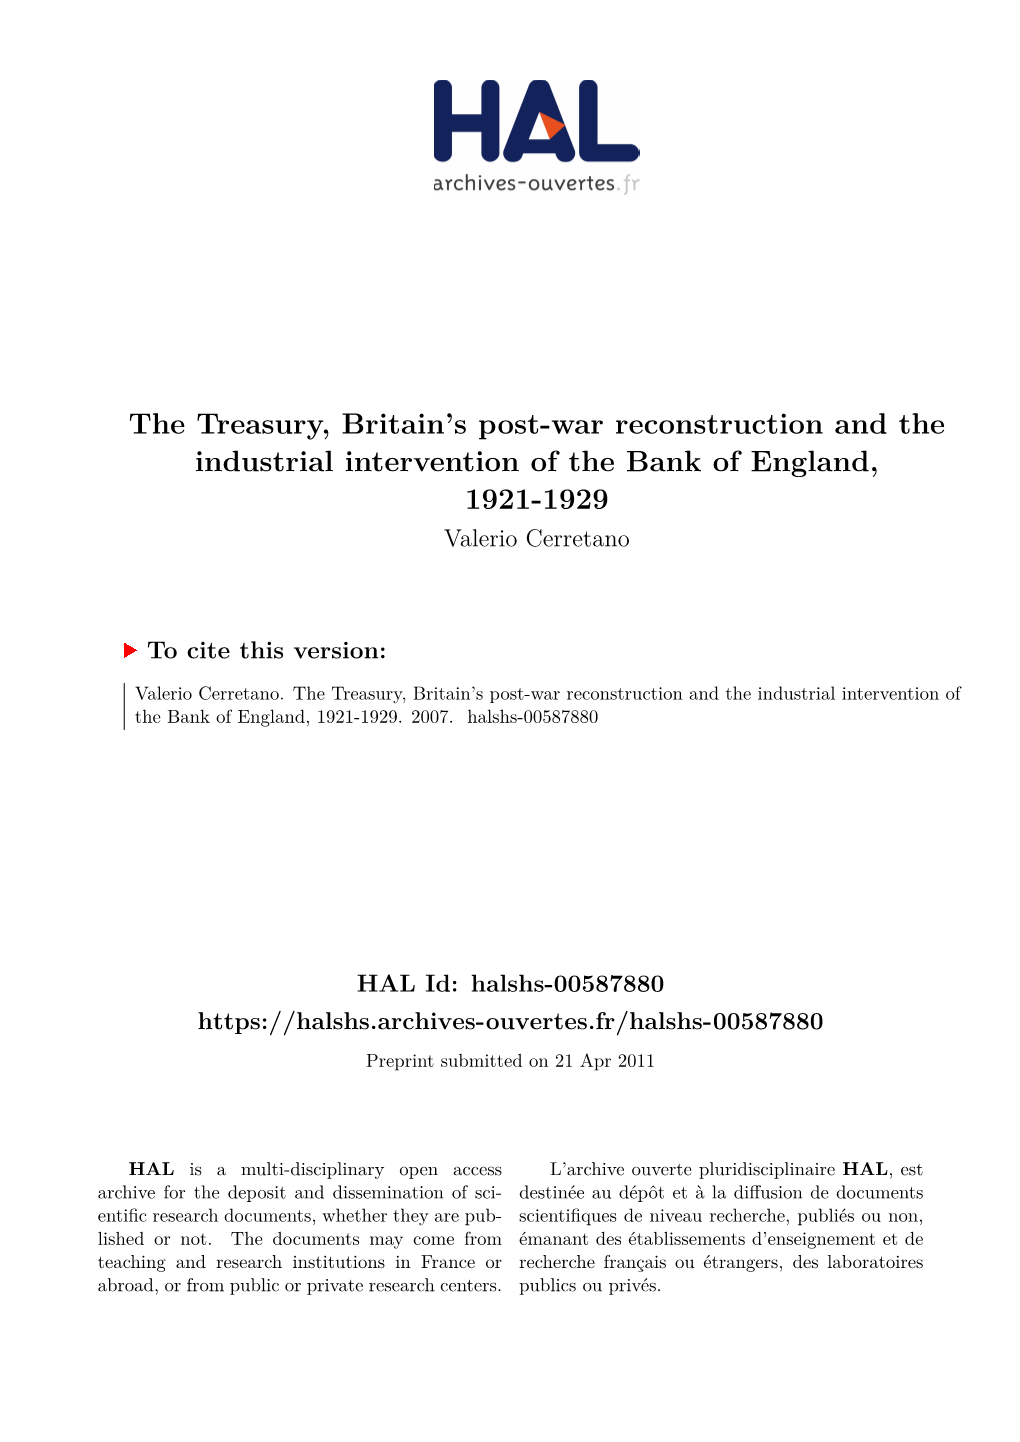 The Treasury, Britain's Post-War Reconstruction and The